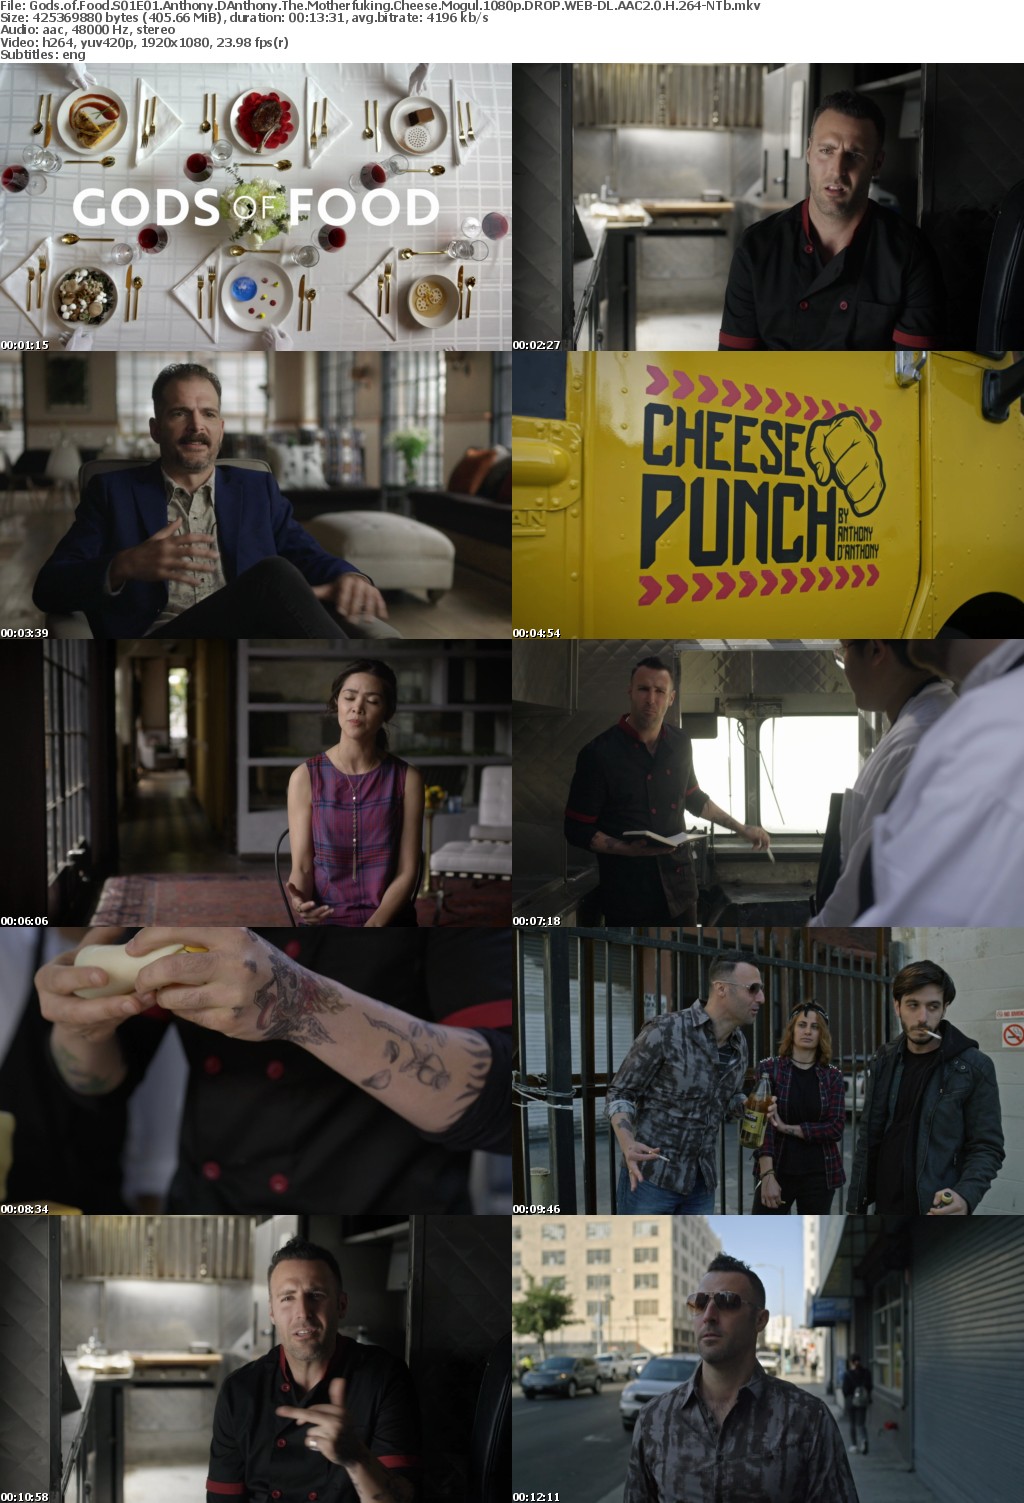 Gods of Food S01E01 Anthony DAnthony The Motherfuking Cheese Mogul 1080p DROP WEB-DL AAC2 0 H 264-NTb